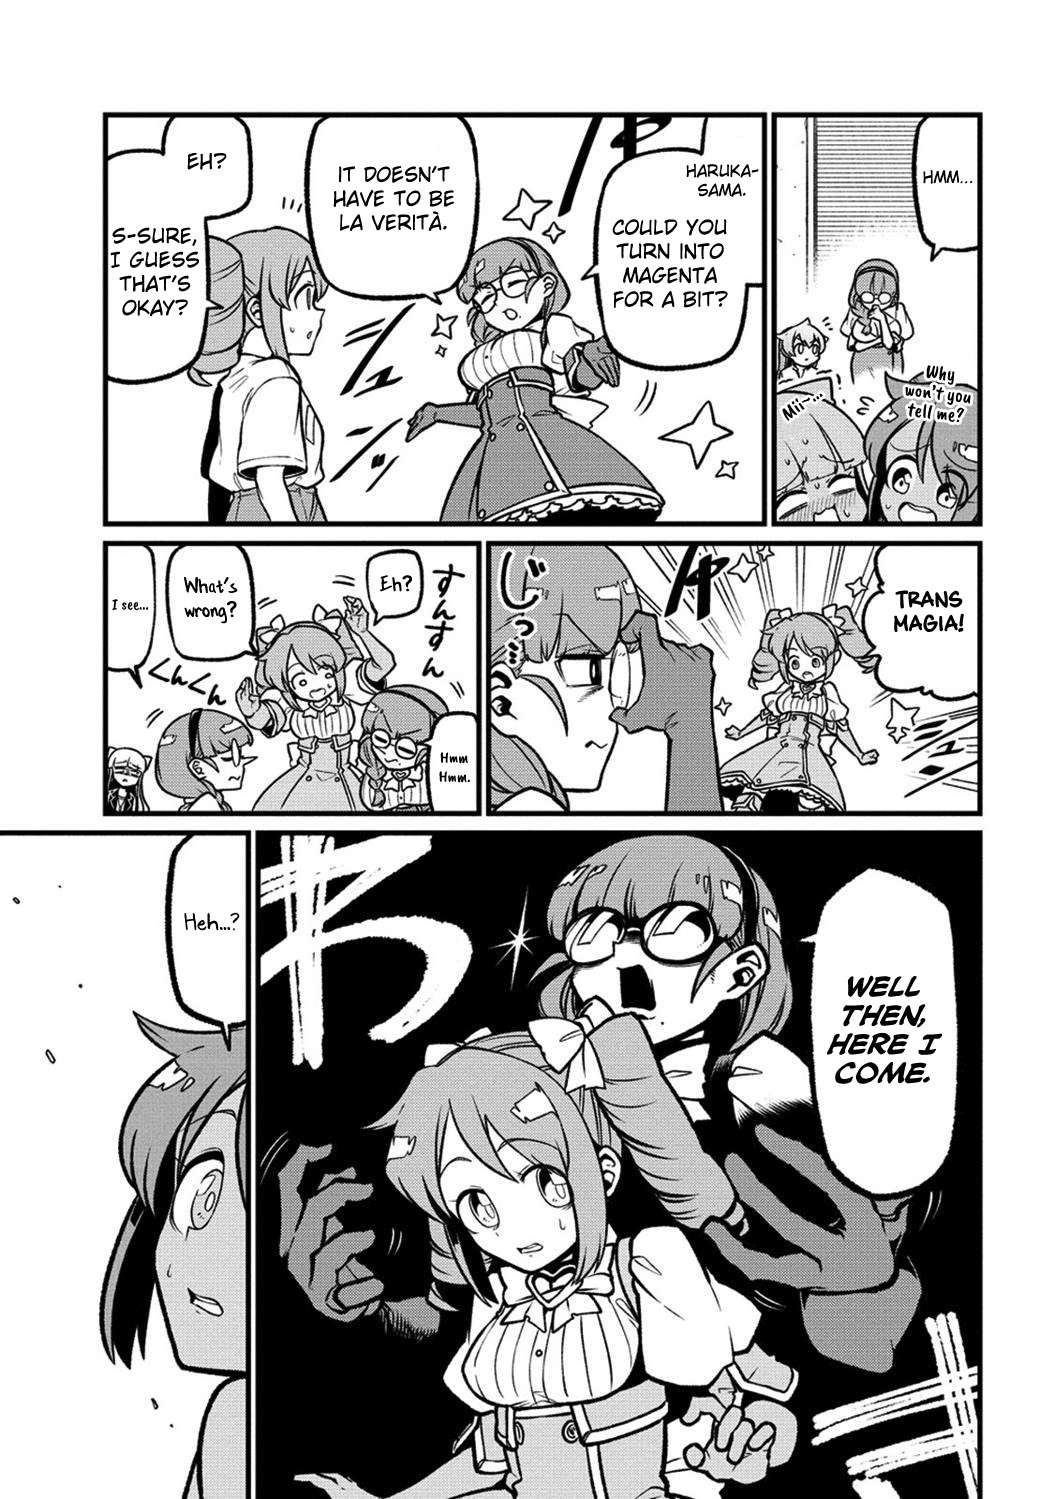 Read Looking up to Magical Girls Manga English [New Chapters] Online Free -  MangaClash